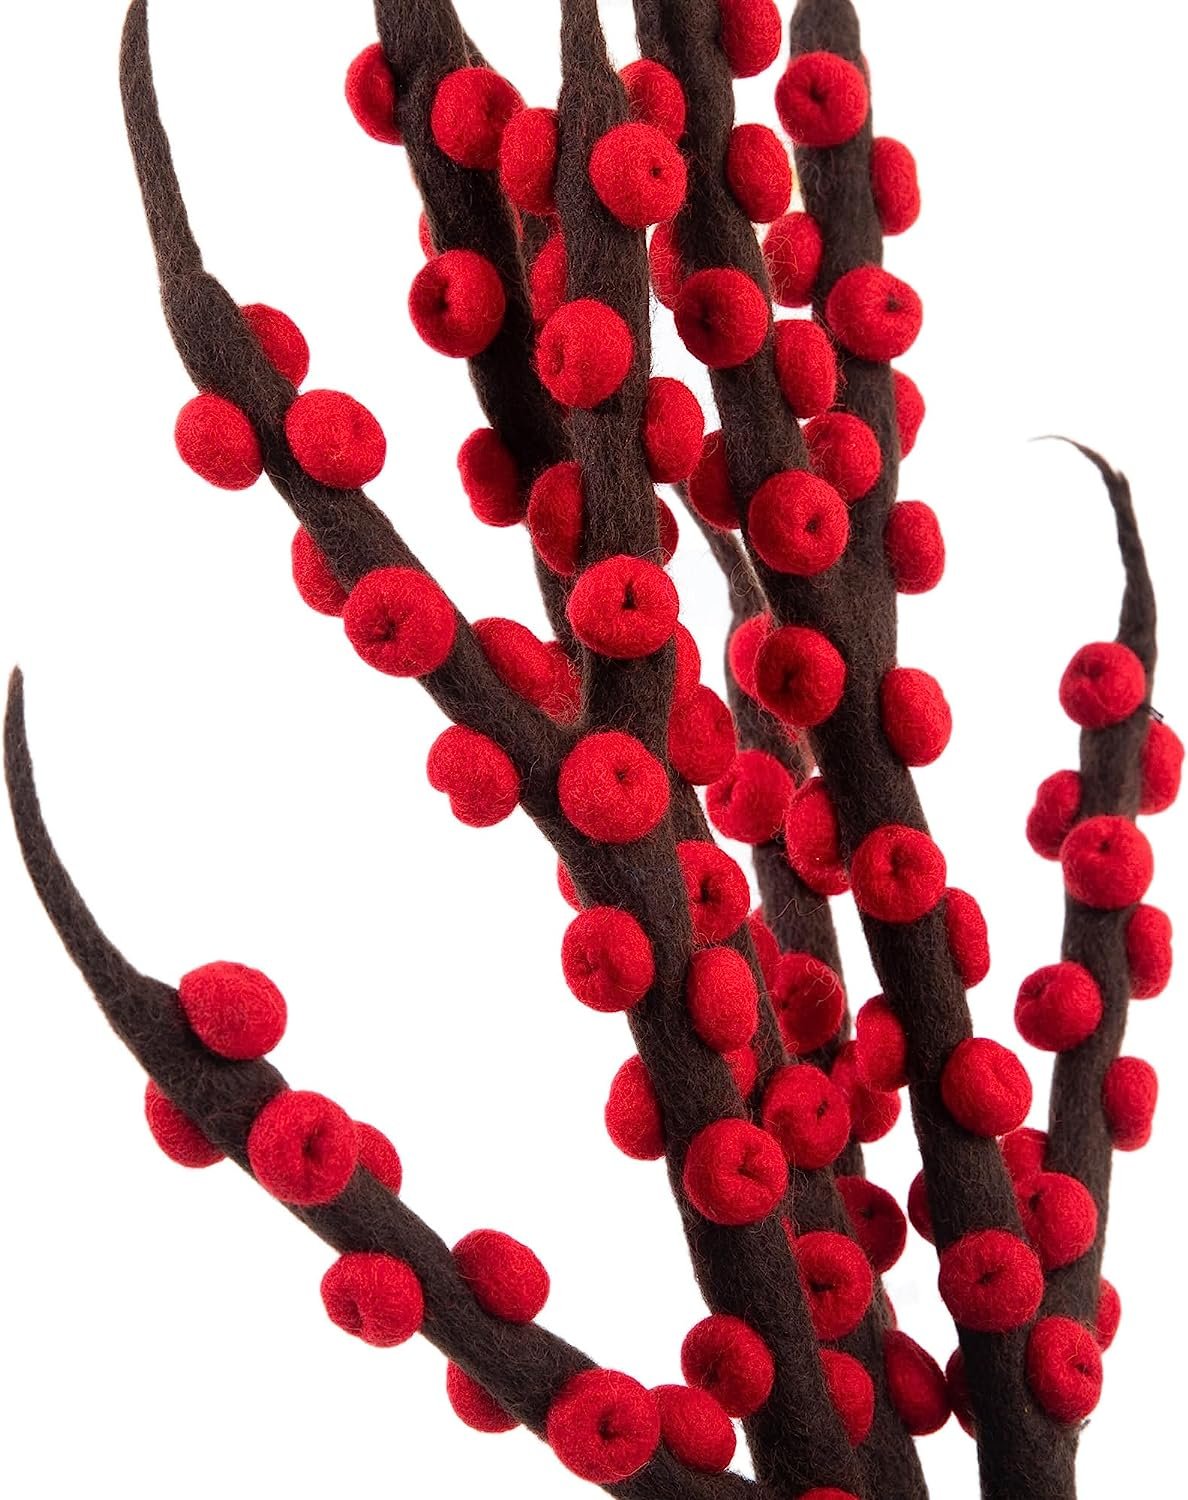 Woolygon Ilex Berry Red Artificial Flowers - Reusable, Washable Felted Flower Stem - Artificial Bouquet Natural Felt Hand-Made Fair Trade Flower | Great as Gift and Home or Event Decorations (Red)